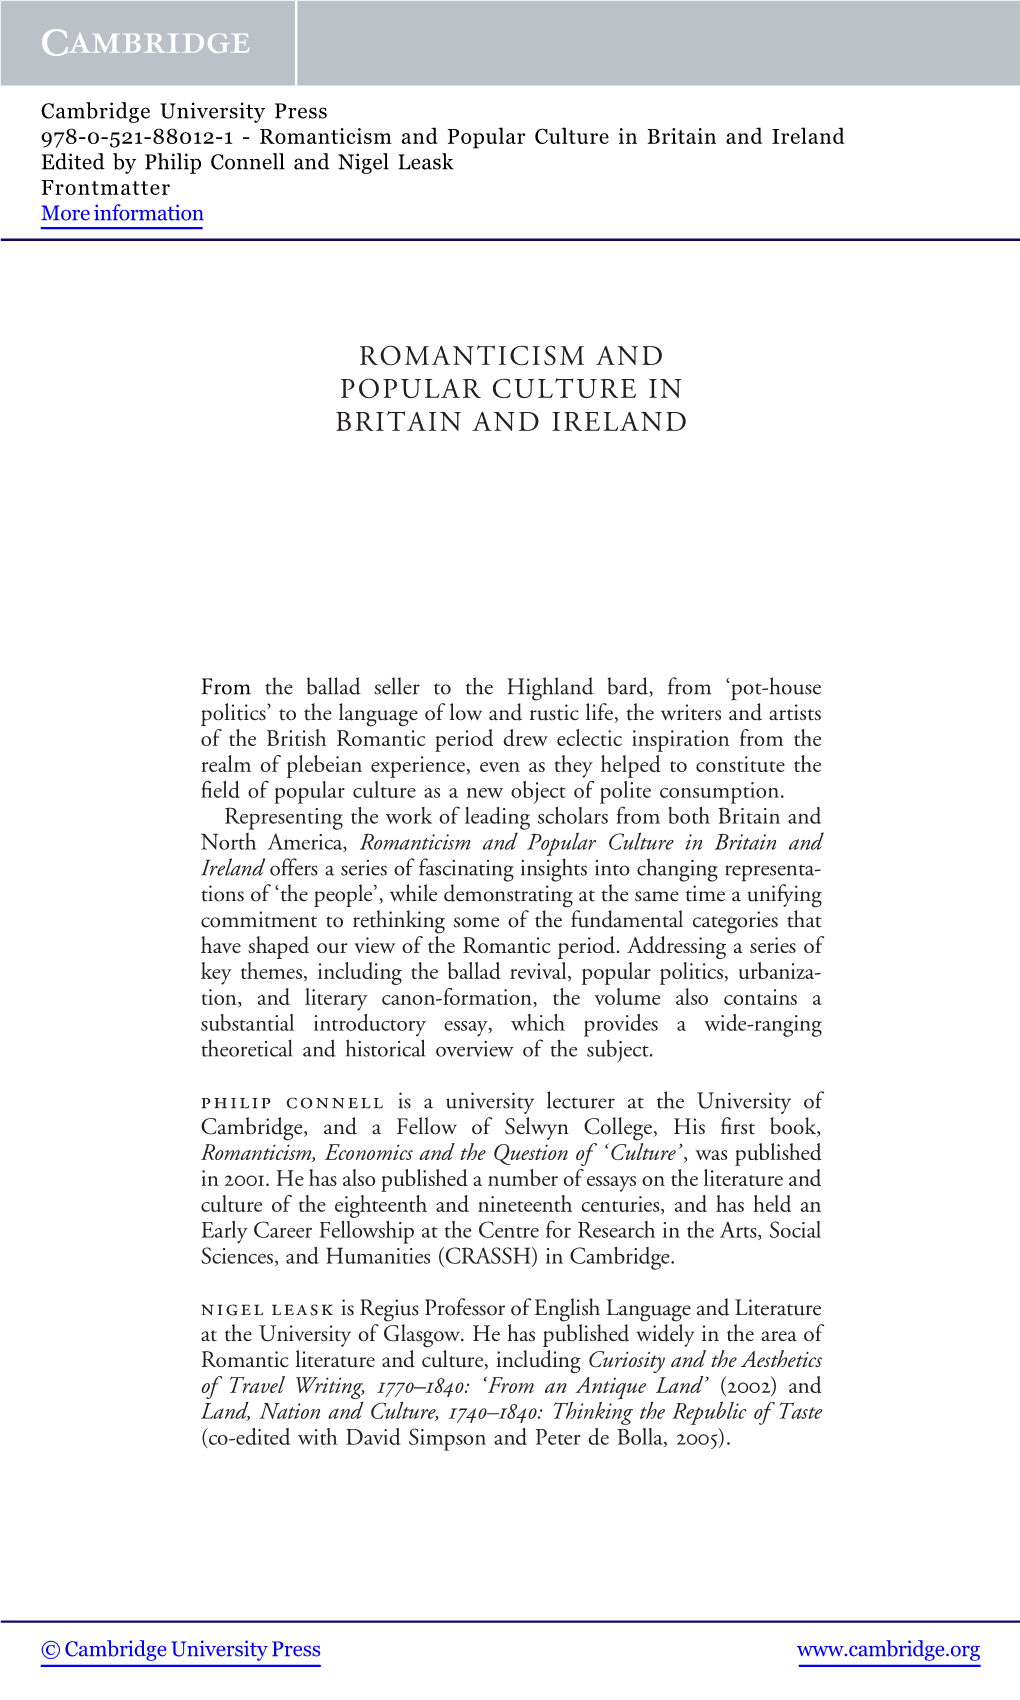 Romanticism and Popular Culture in Britain and Ireland Edited by Philip Connell and Nigel Leask Frontmatter More Information